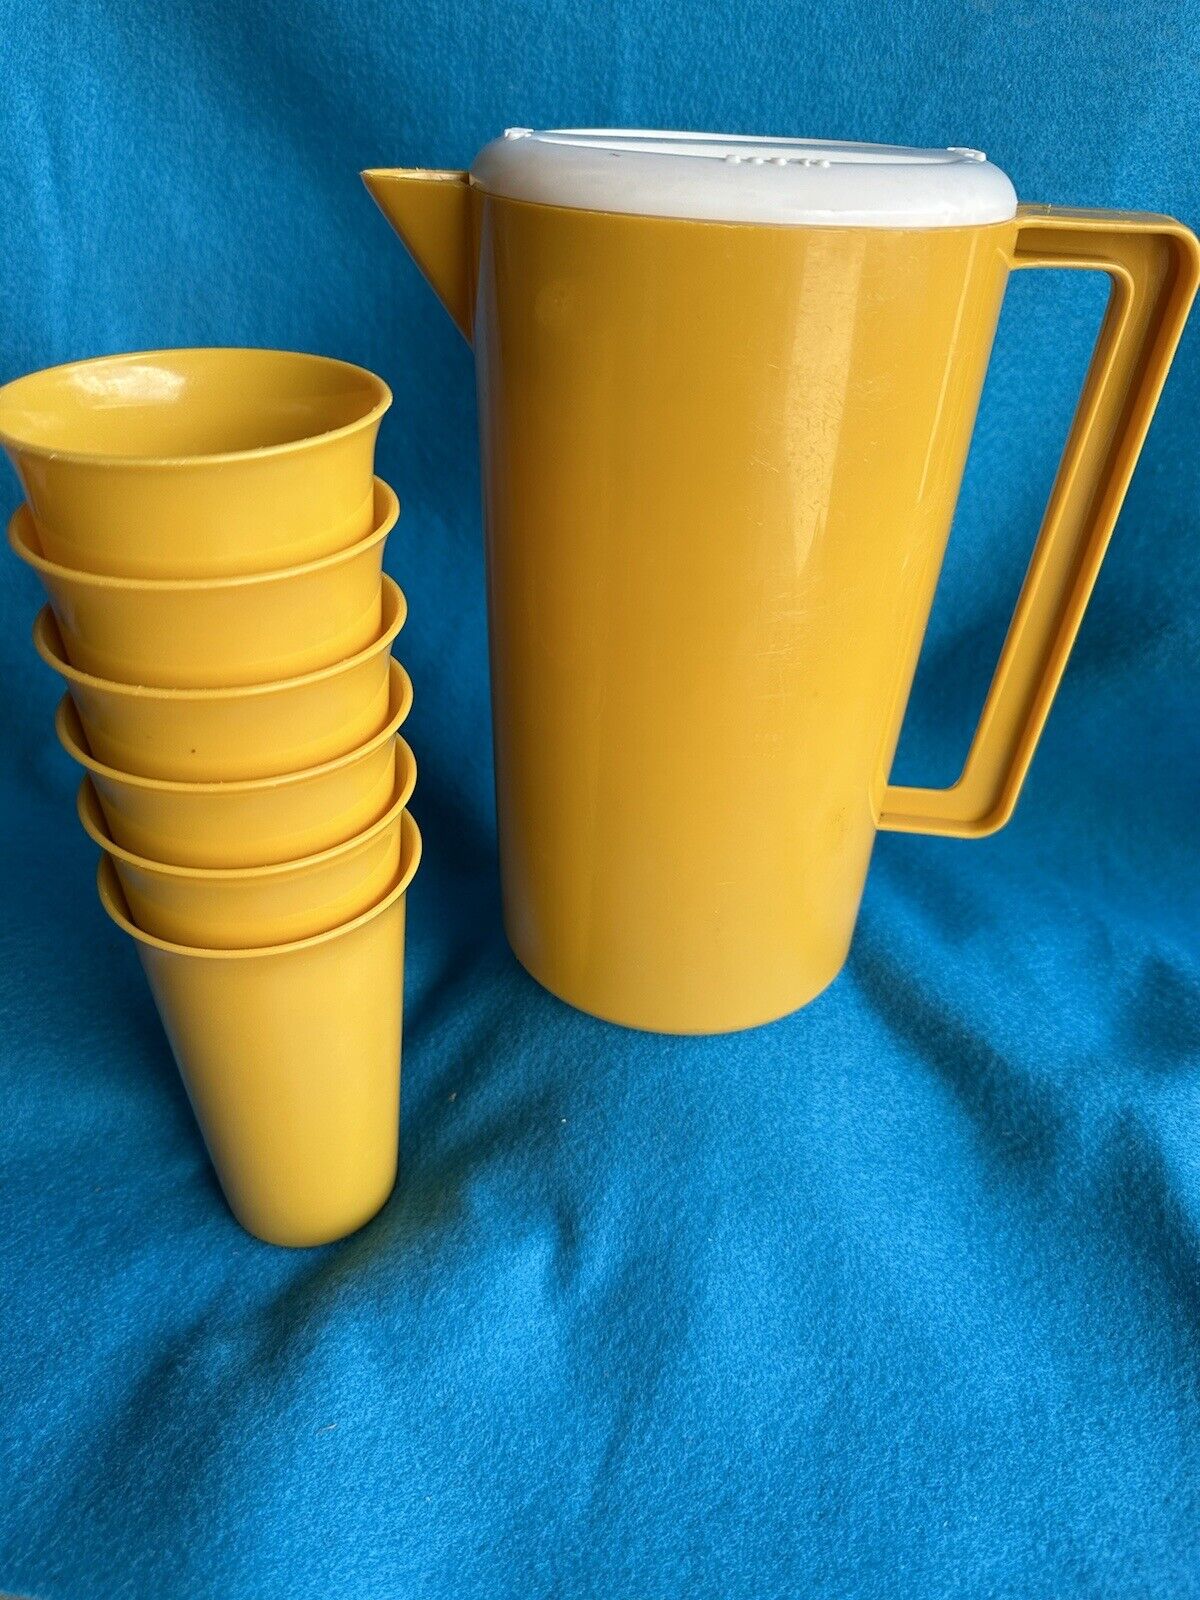 Vintage 1970s 1/2 Gal. Pitcher Yellow Gold/White Strainer Lid W/6 Matching Cups